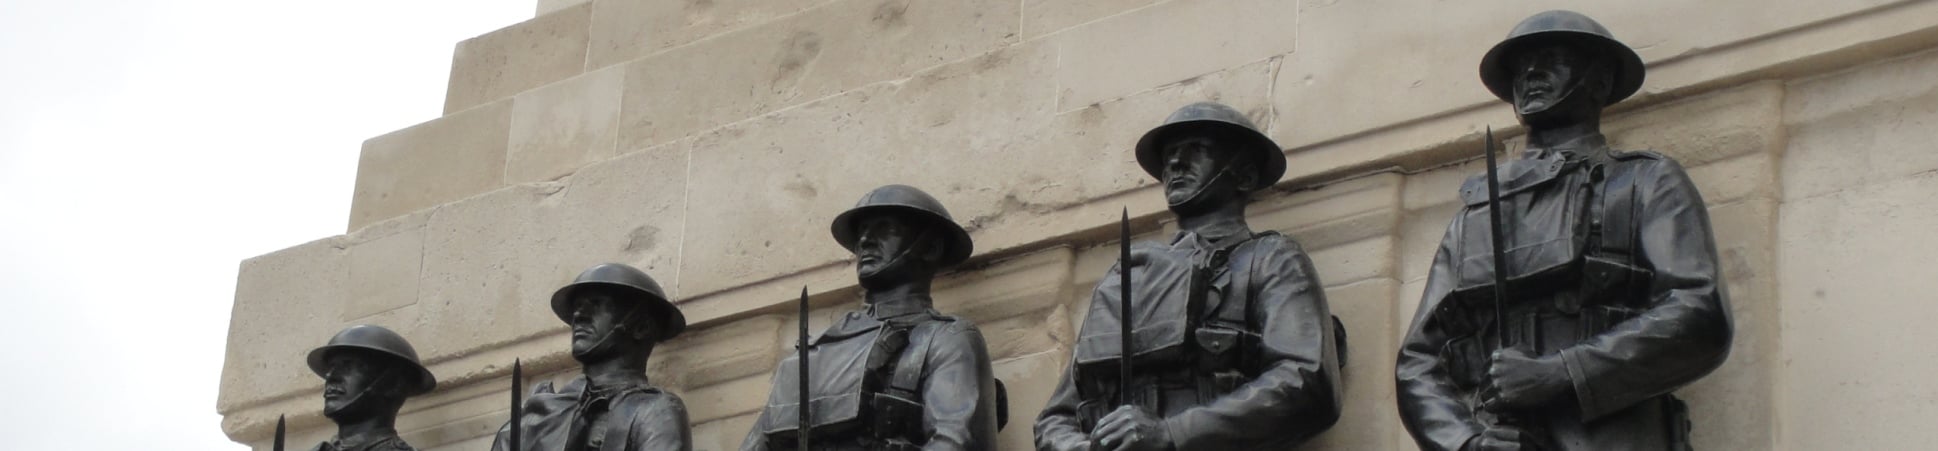 Statues of five guardsmen on the Guards Memorial by Horse Guards Parade, Westminster. It was unveiled in 1926 and commemorates the 14,000 Guardsmen who died in the First World War.